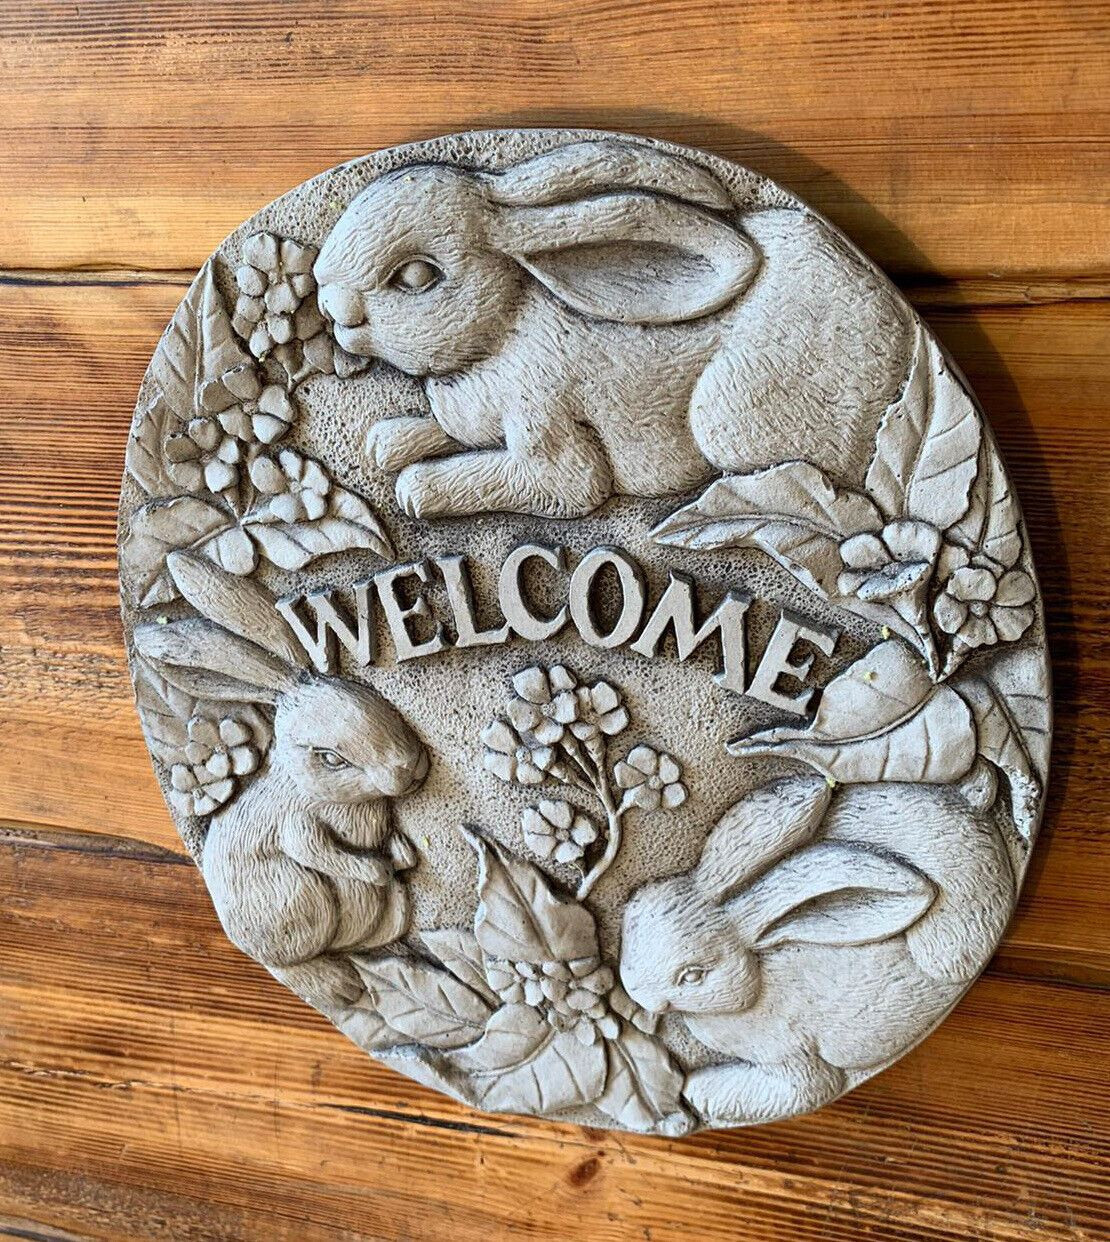 STONE GARDEN LARGE WELCOME RABBIT HARE WALL PLAQUE HANGING ORNAMENT